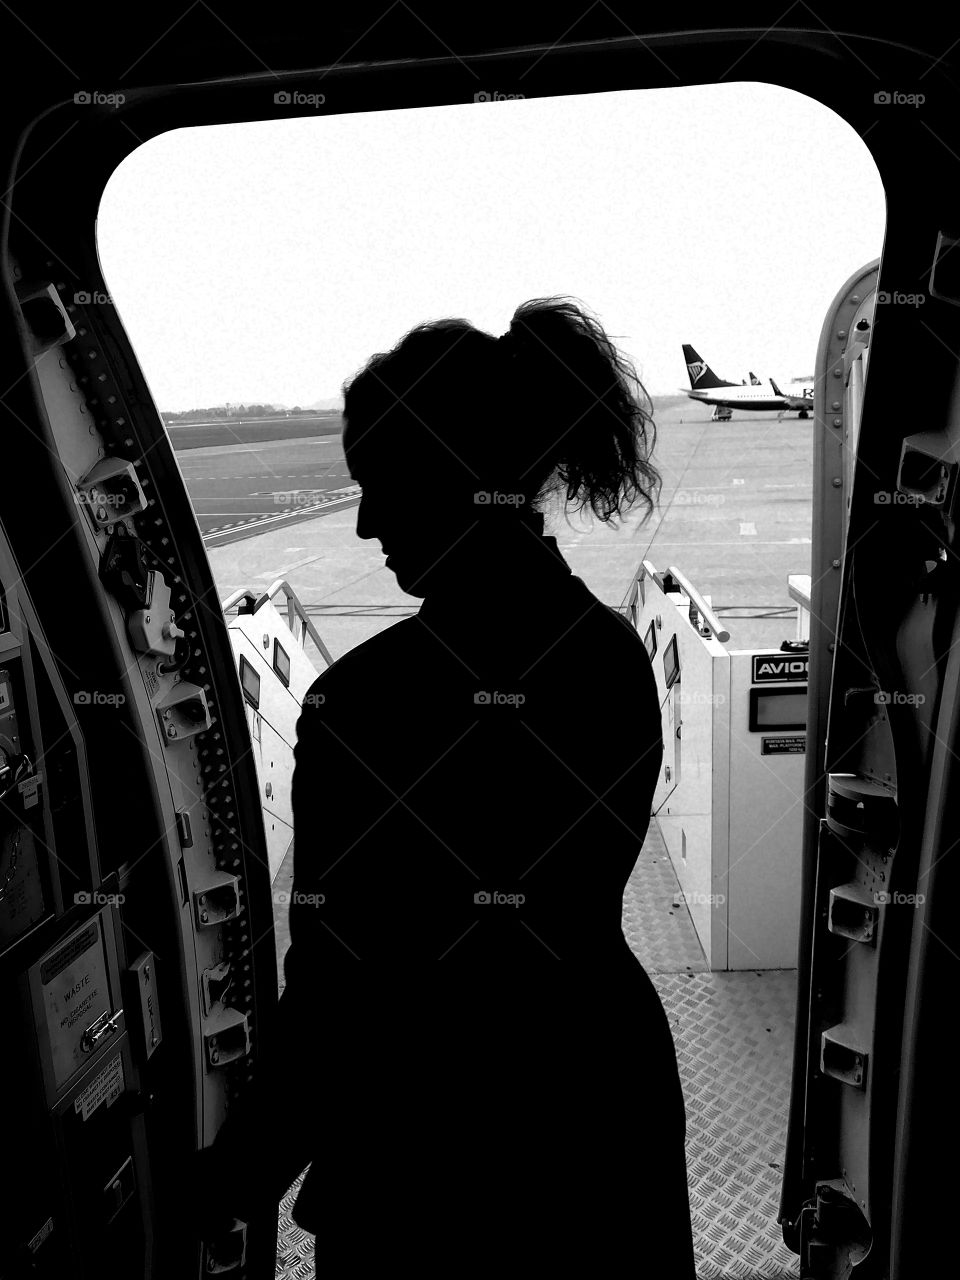 Silhouette and plane